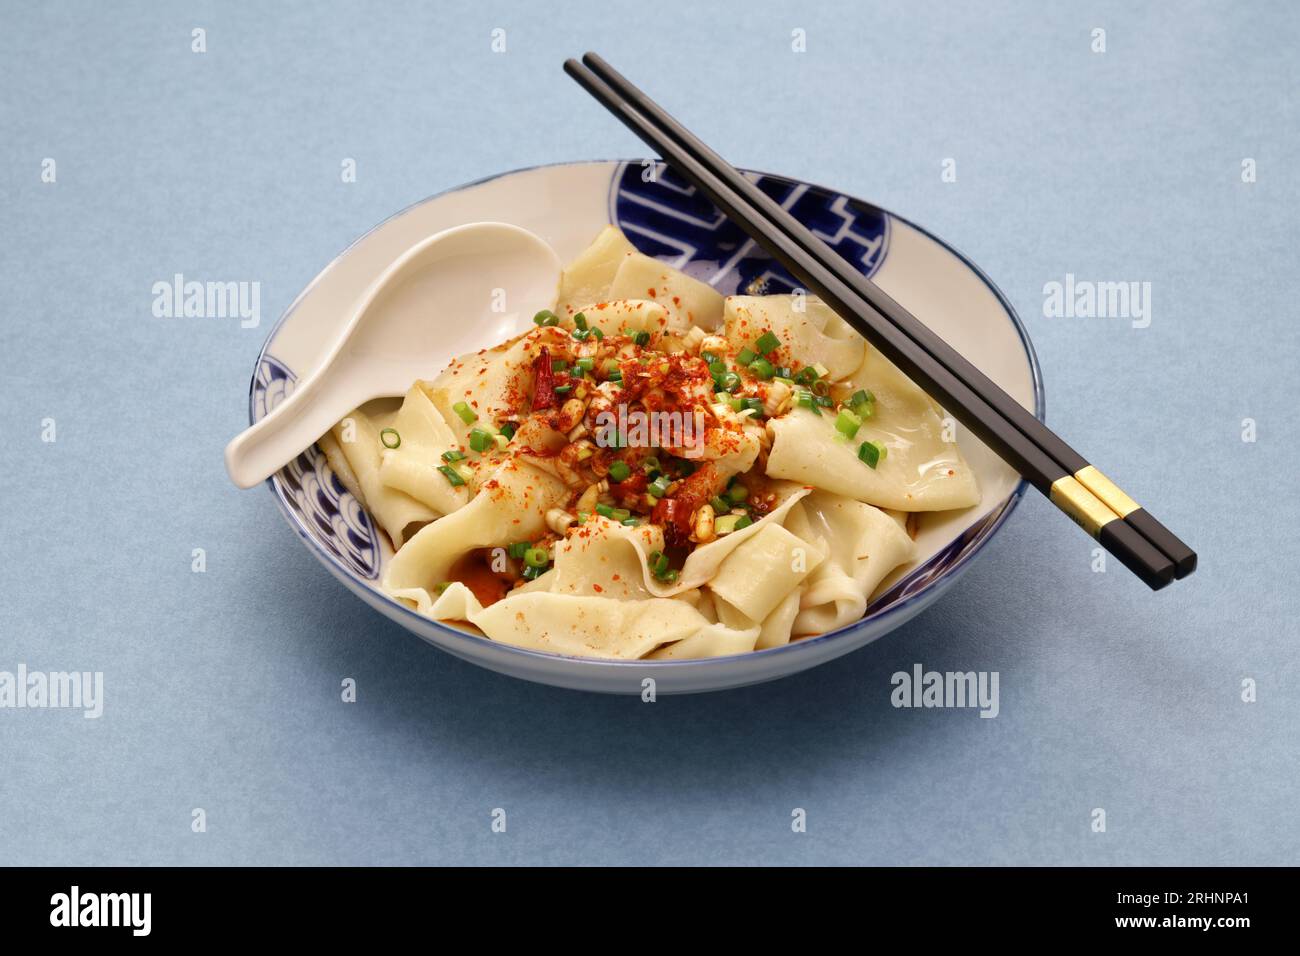 Biangbiang noodles, Chinese Shaanxi cuisine Stock Photo